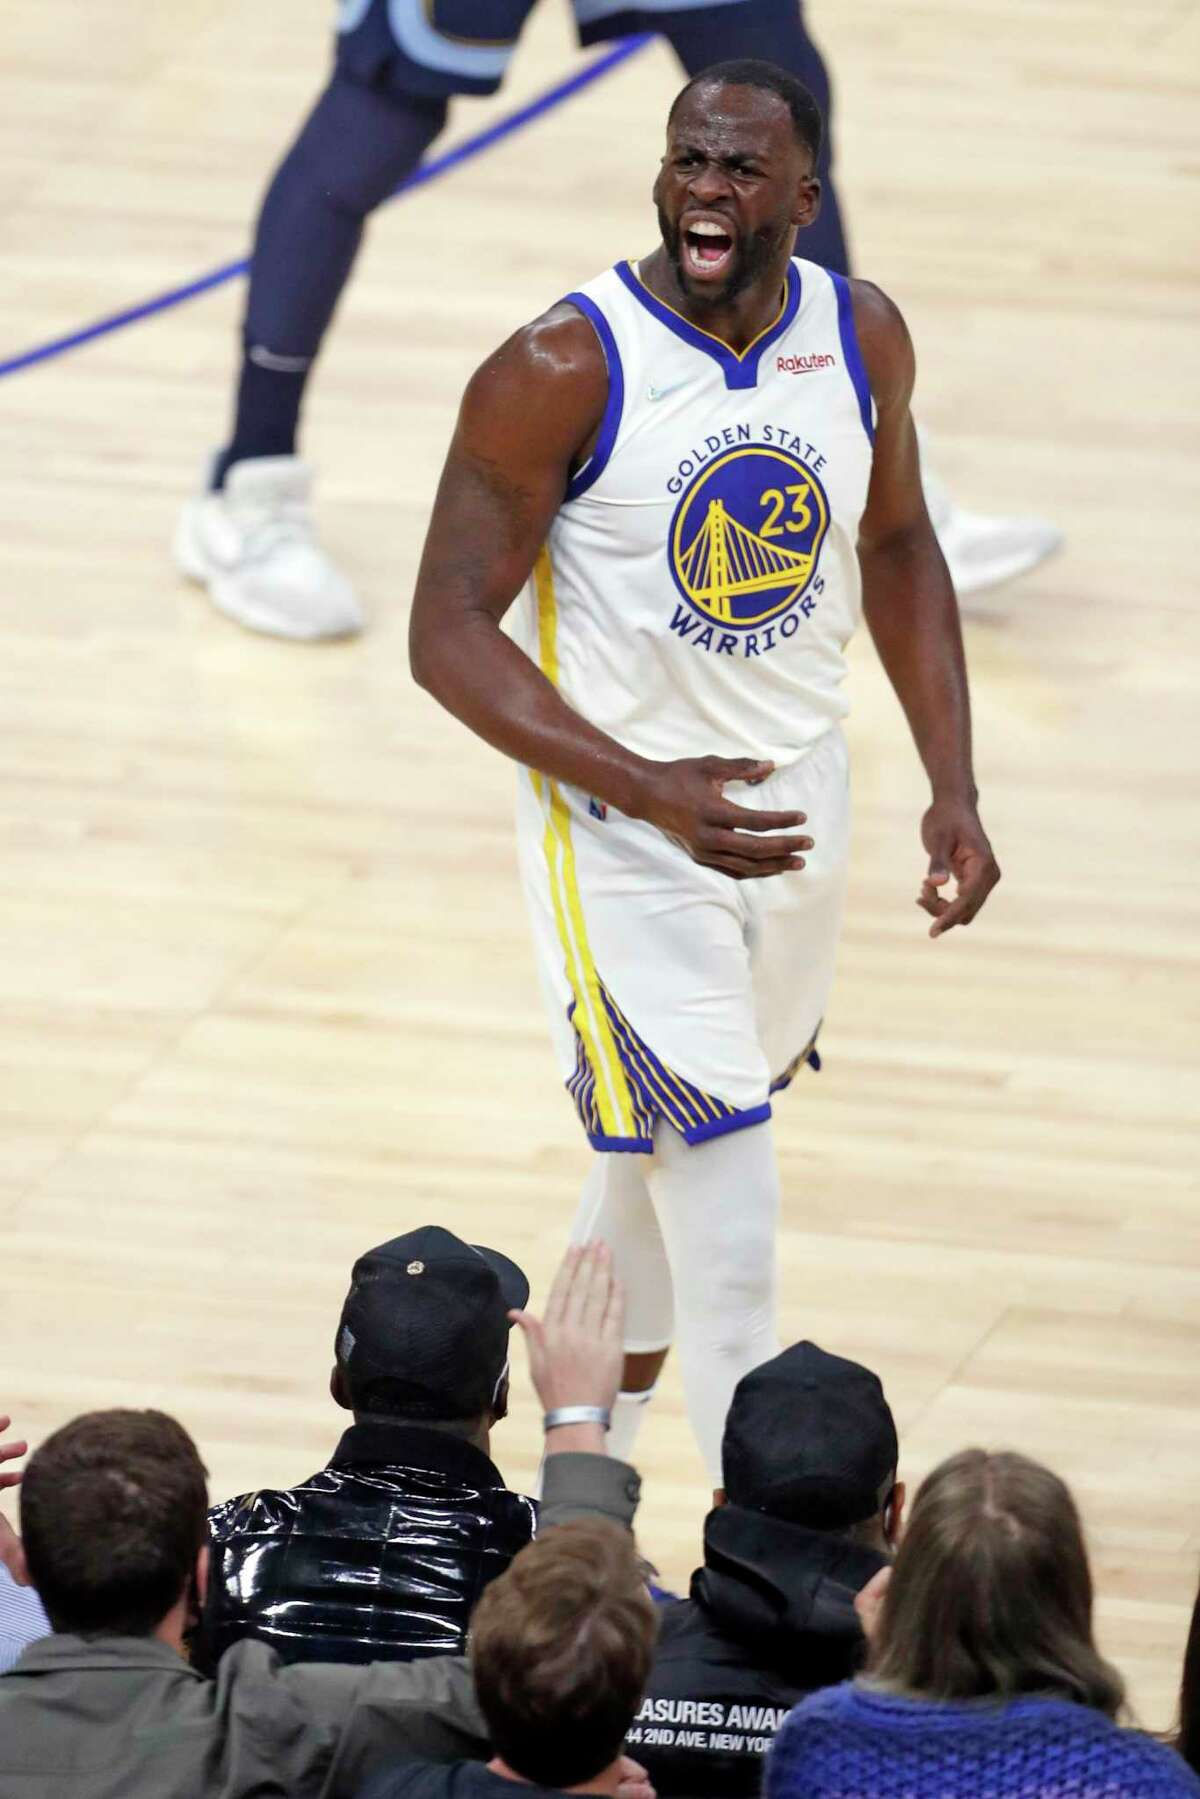 Golden State Warriors' Draymond Grren reacts to a defensive play in 1st quarter against Memphis Grizzlies during NBA game at Chase Center in San Francisco, Calif., on Thursday, October 28, 2021.